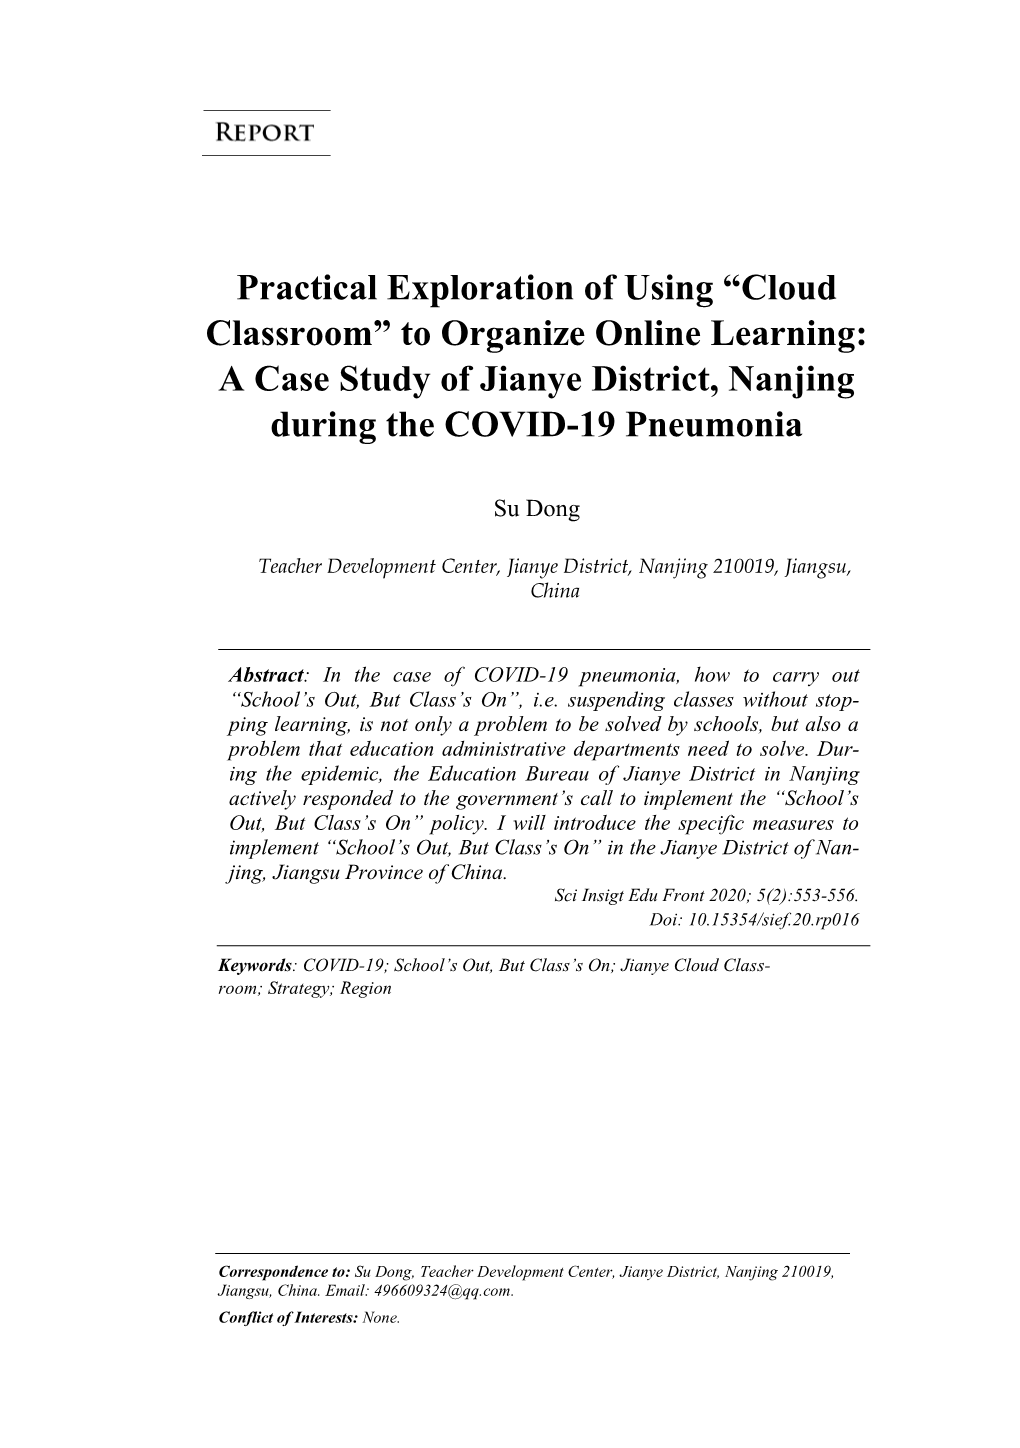 Cloud Classroom” to Organize Online Learning: a Case Study of Jianye District, Nanjing During the COVID-19 Pneumonia